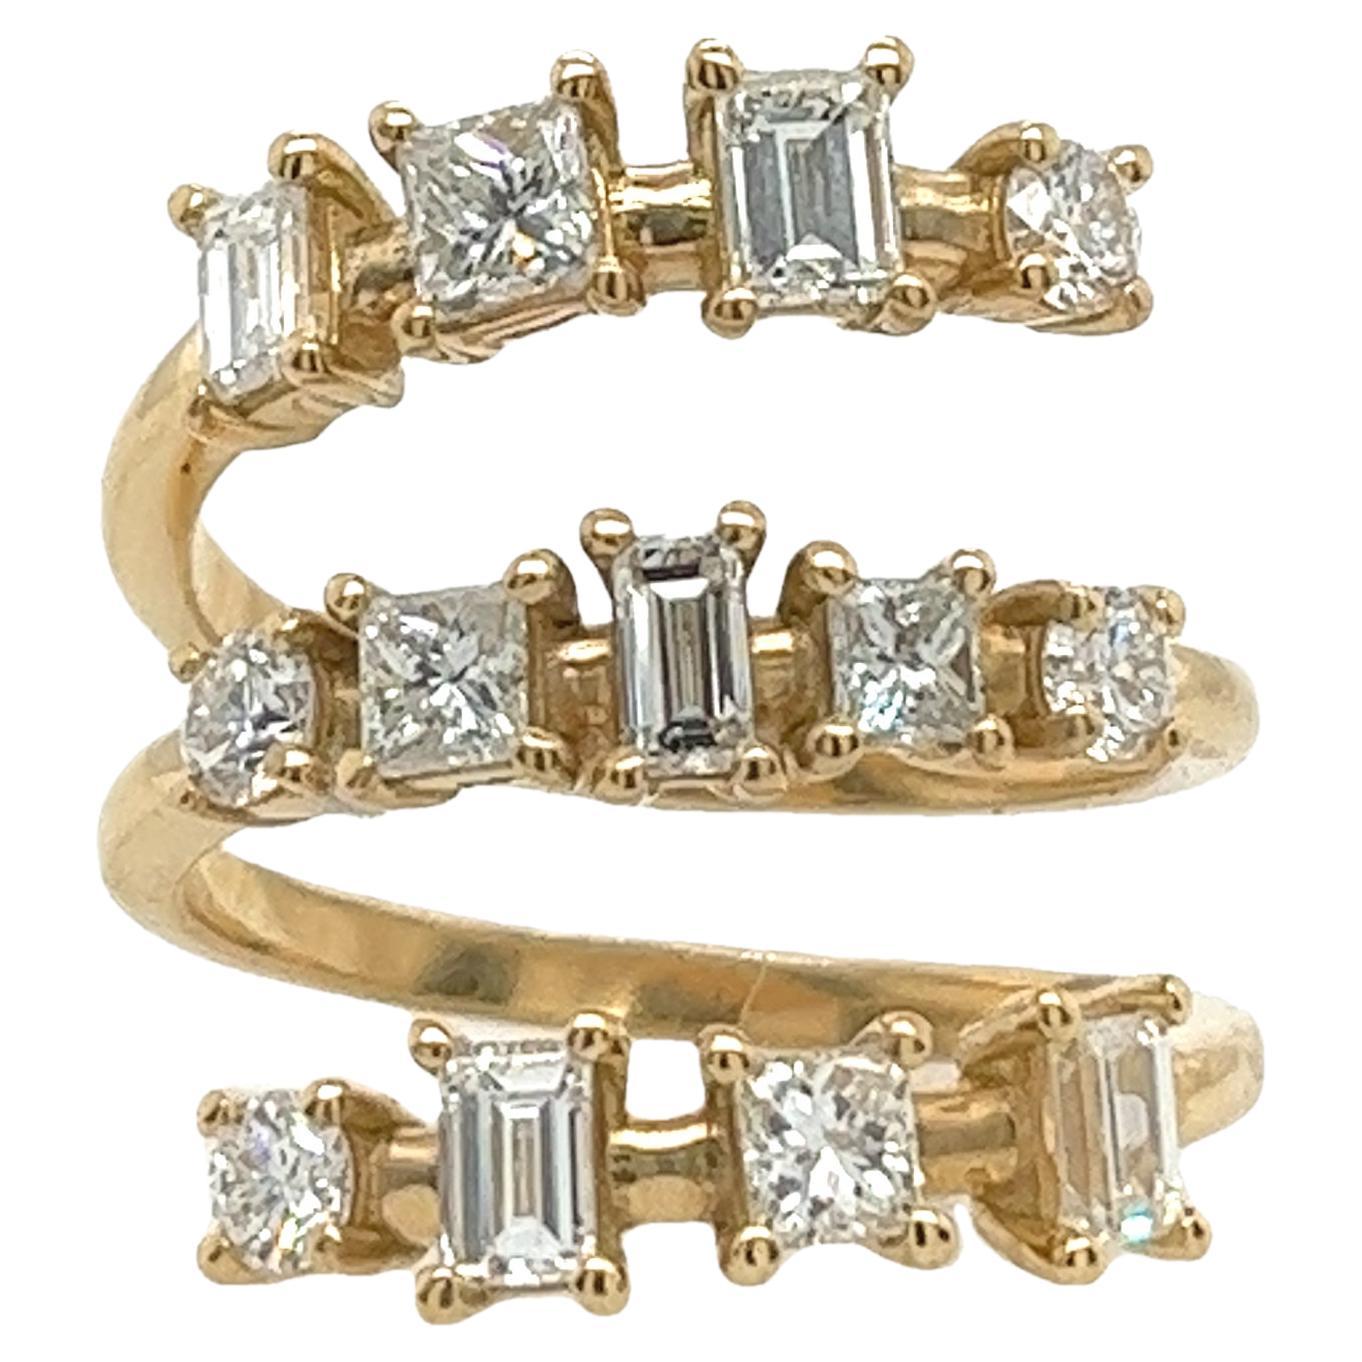 Multi Diamond Shaped Coil Ring, 2.10ct in total Set in 18ct Yellow Gold